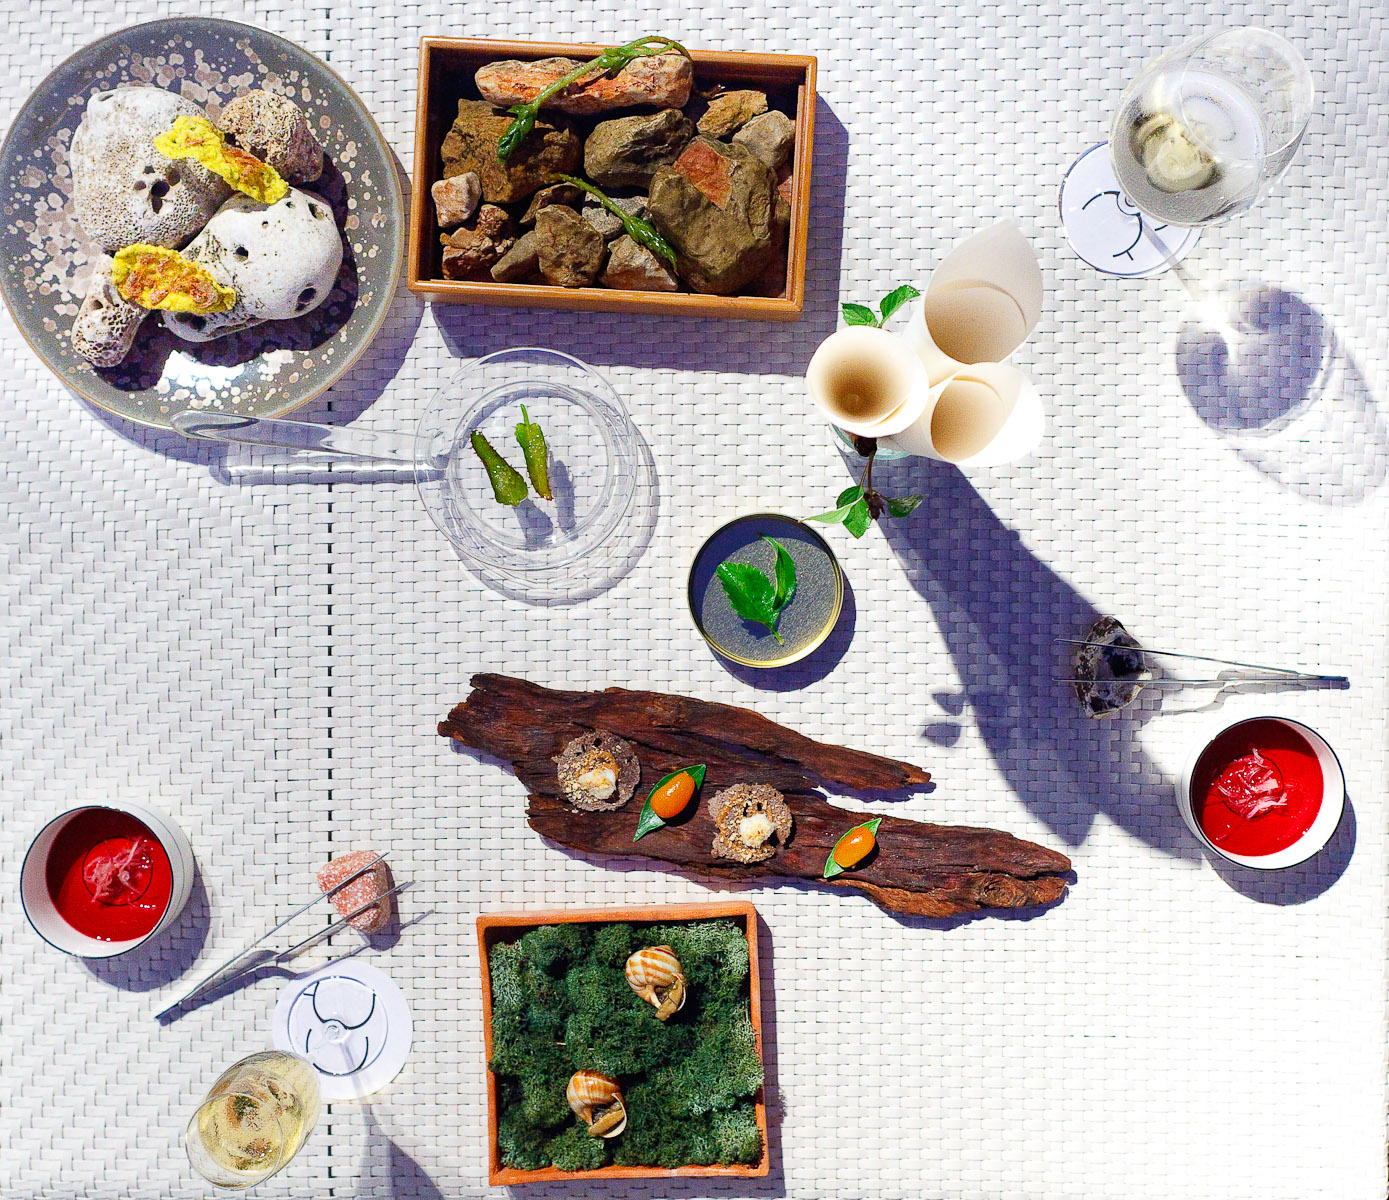 Amuse bouche: Cinnamon basil, Kalanchoe and oil, Cold tea, chicory and hibiscus, Pickled Raïm of pastor, Snail, Shrimp cake with Hazelnut oil, Kumquat with flying fish eggs